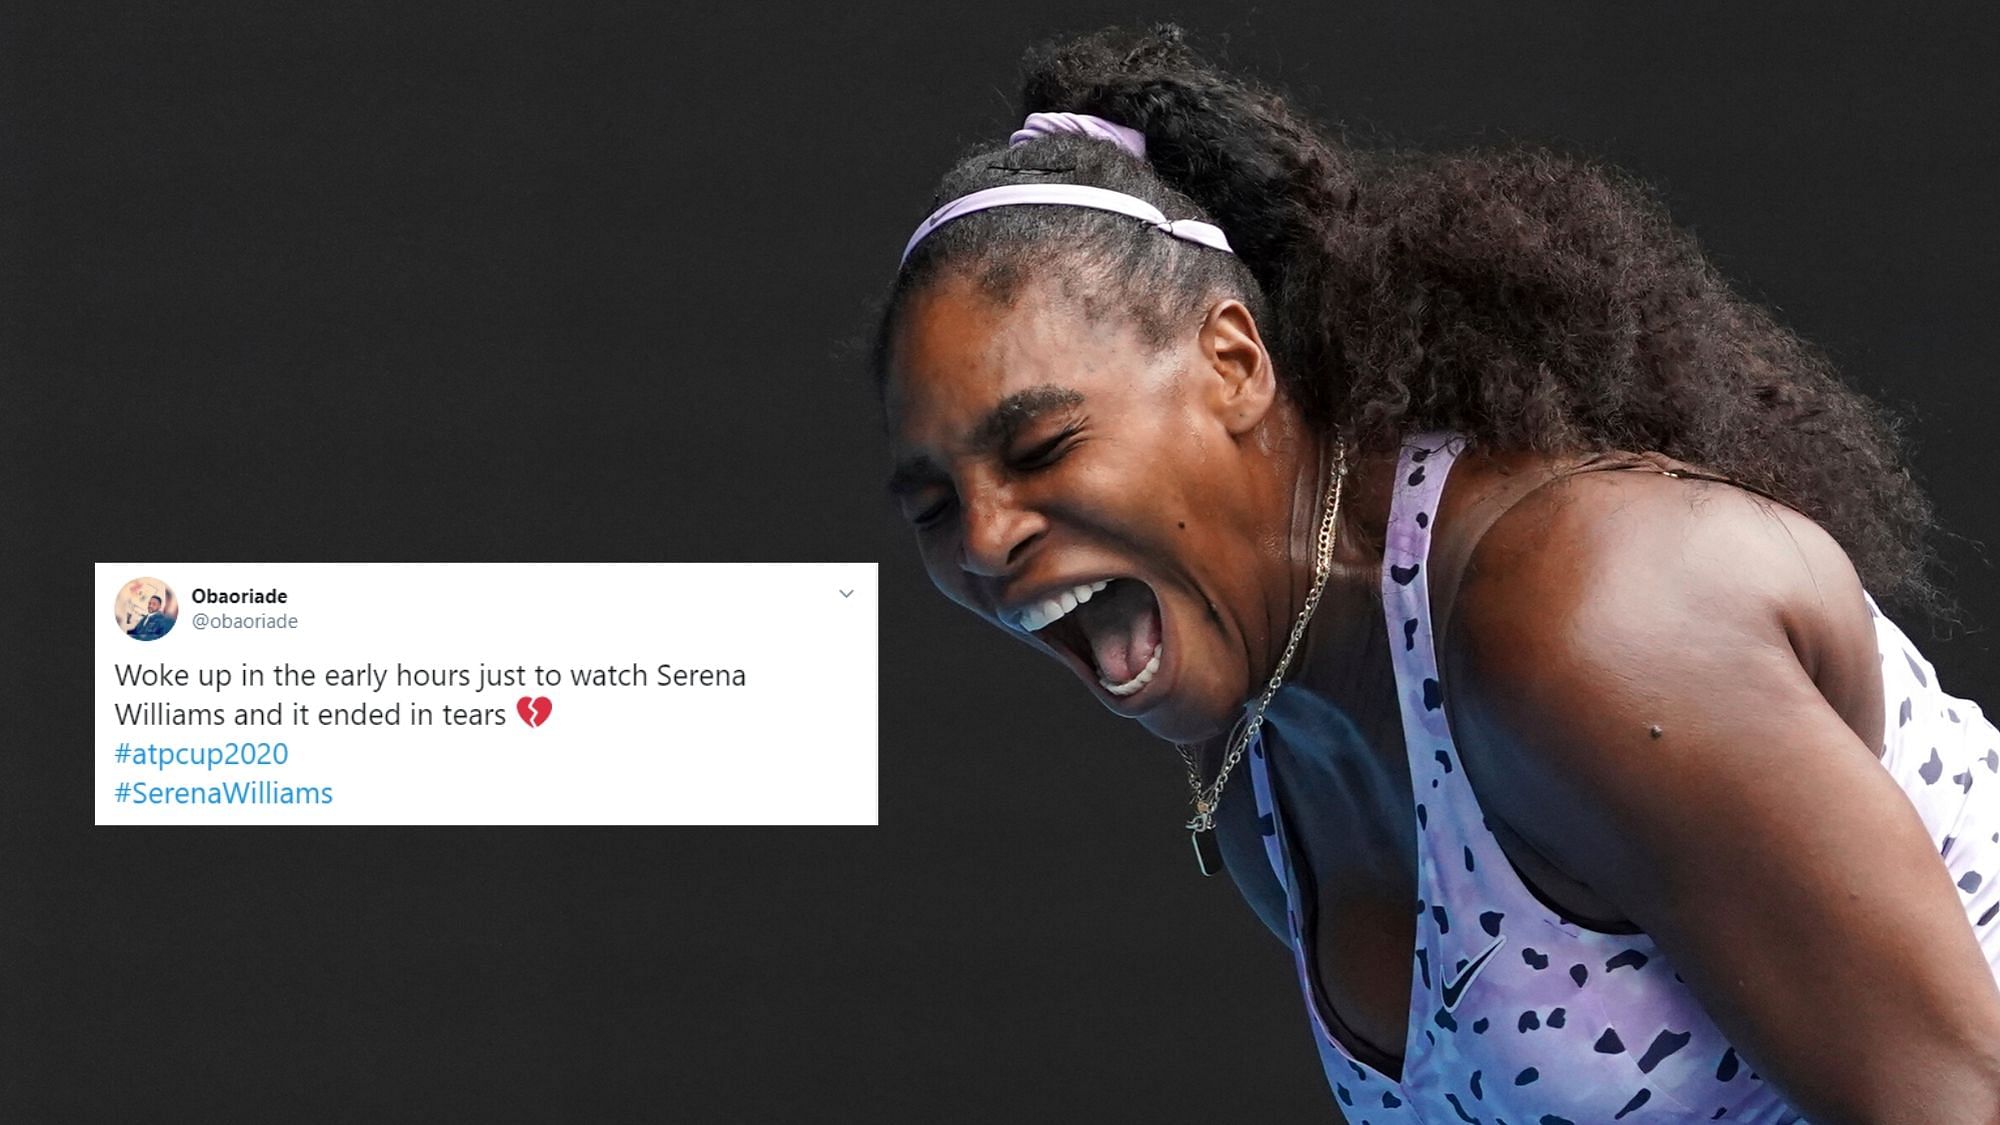 Seven-time champion Serena Williams suffered a shocking third round defeat to Qiang Wang on Friday, 24 January making an early exit from the Australian Open.